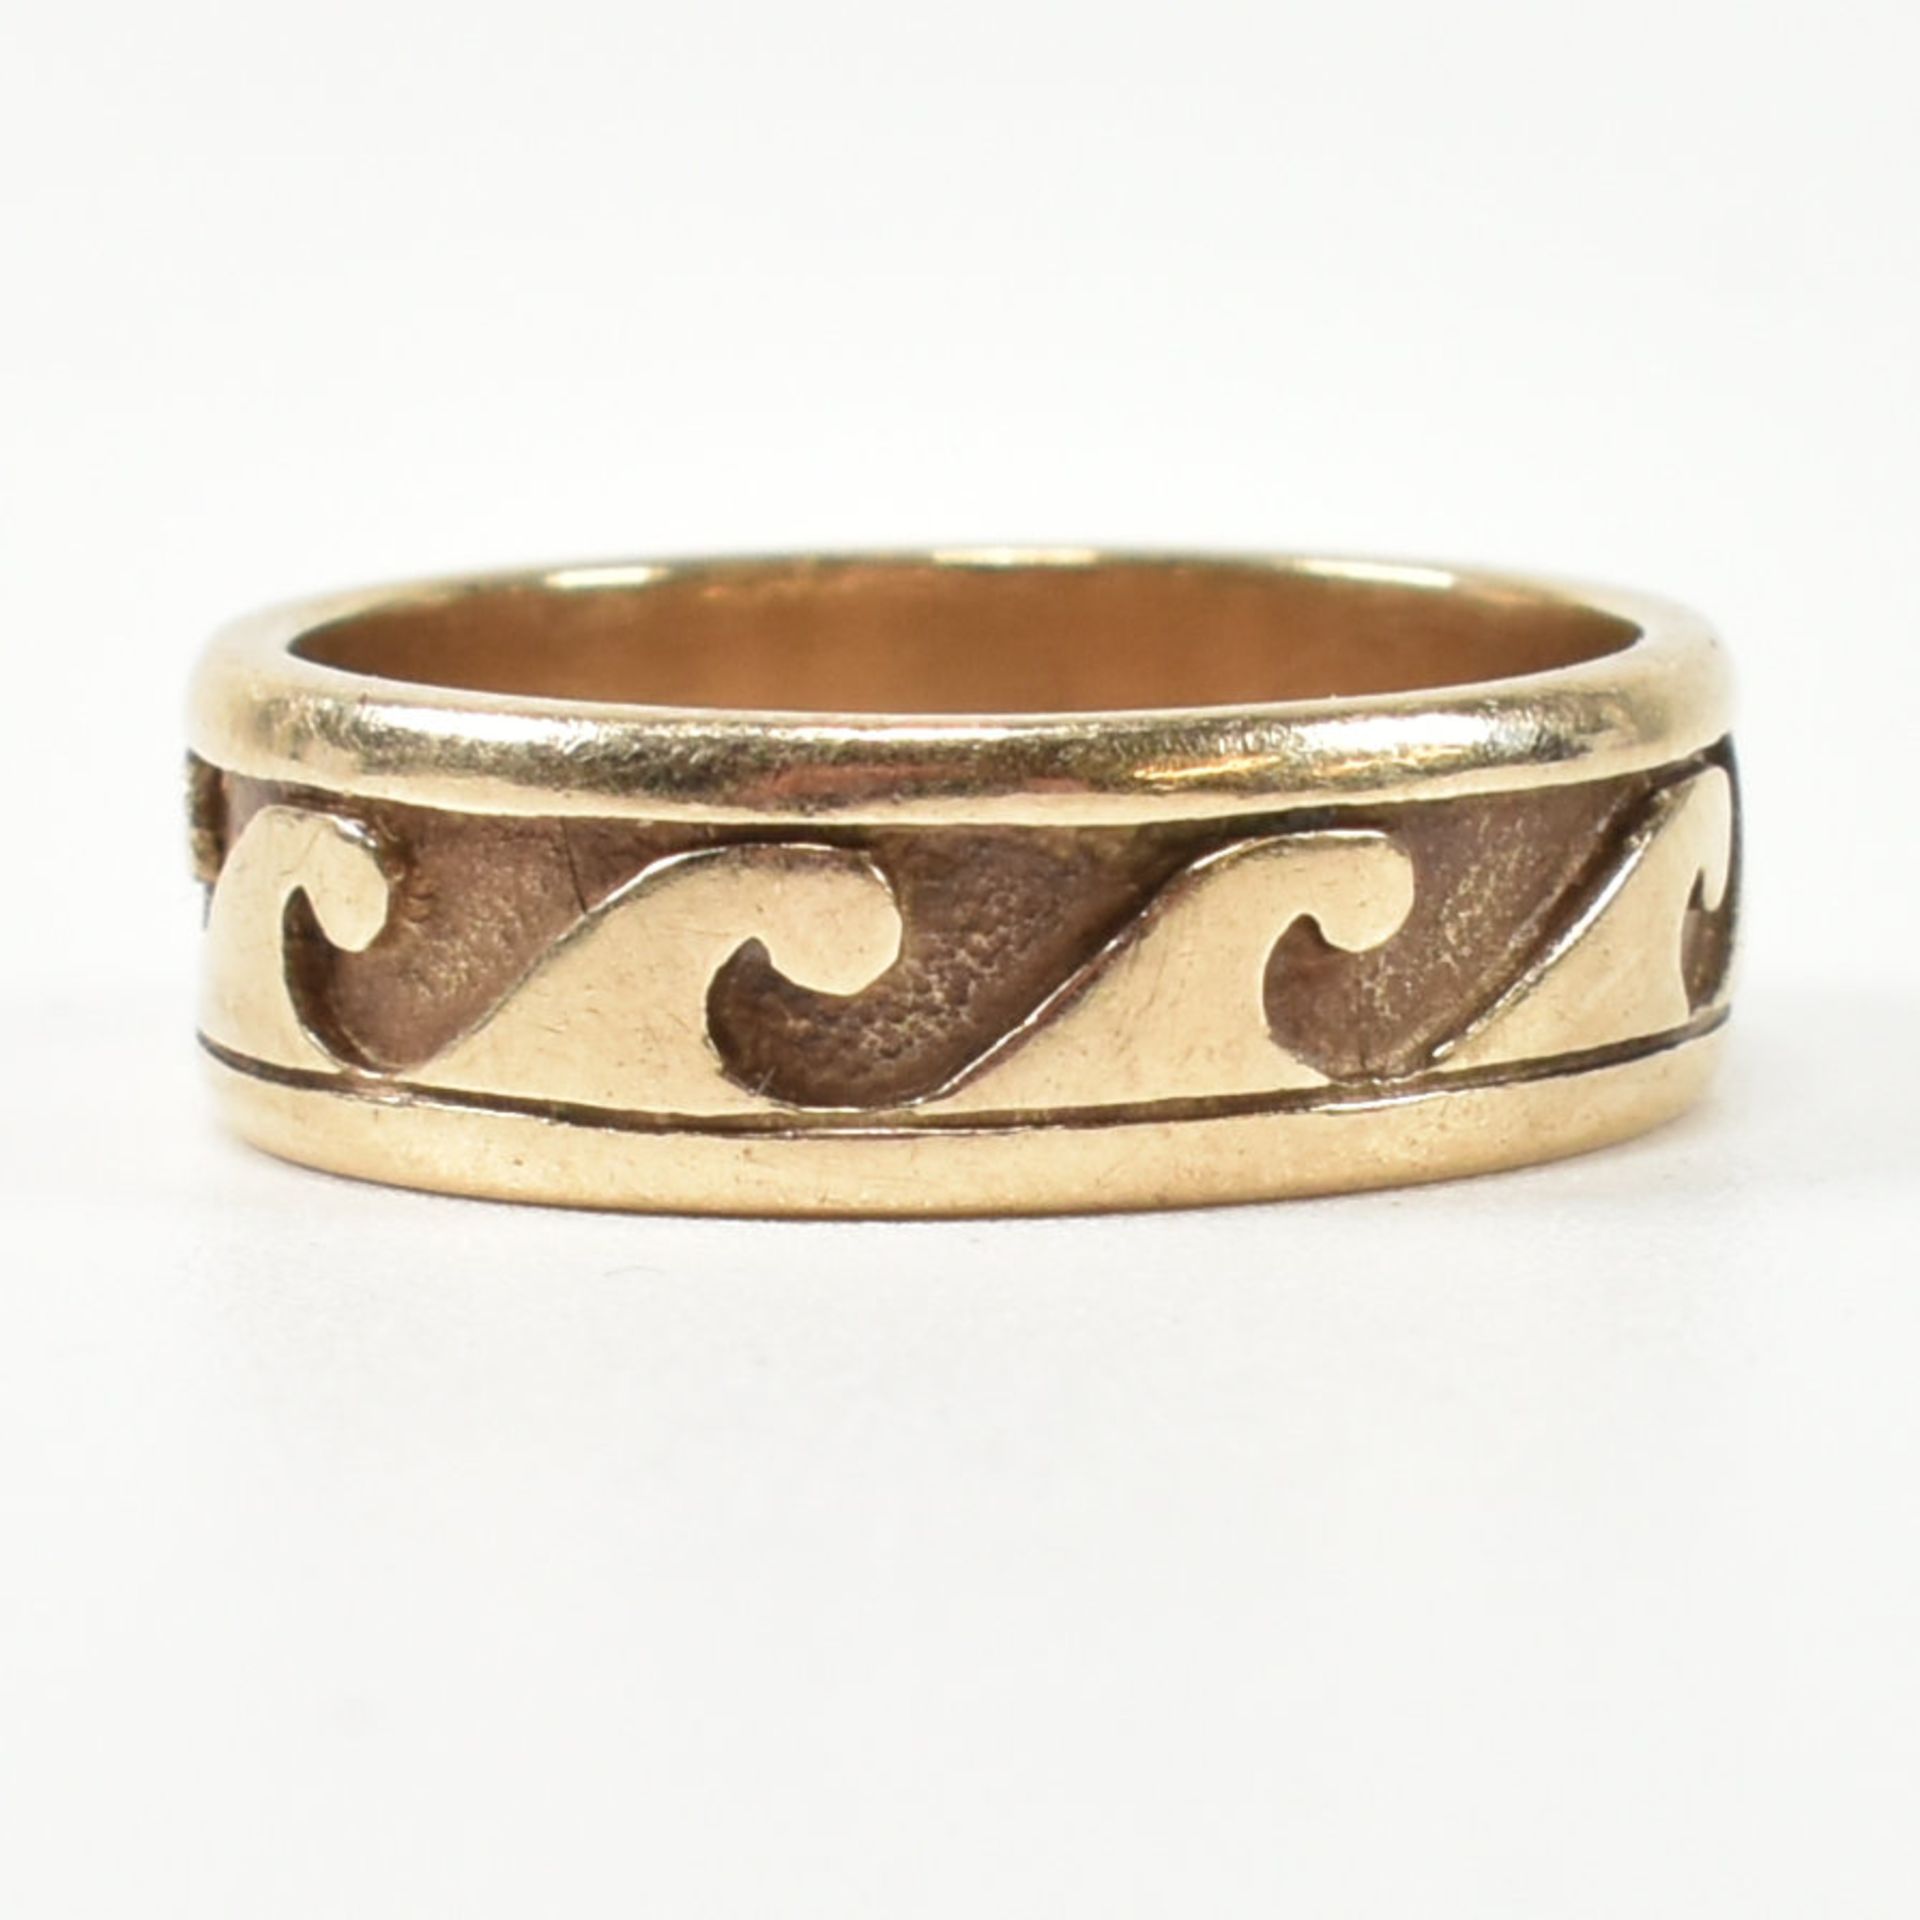 HALLMARKED 9CT GOLD WAVE DESIGN BAND RING - Image 2 of 5